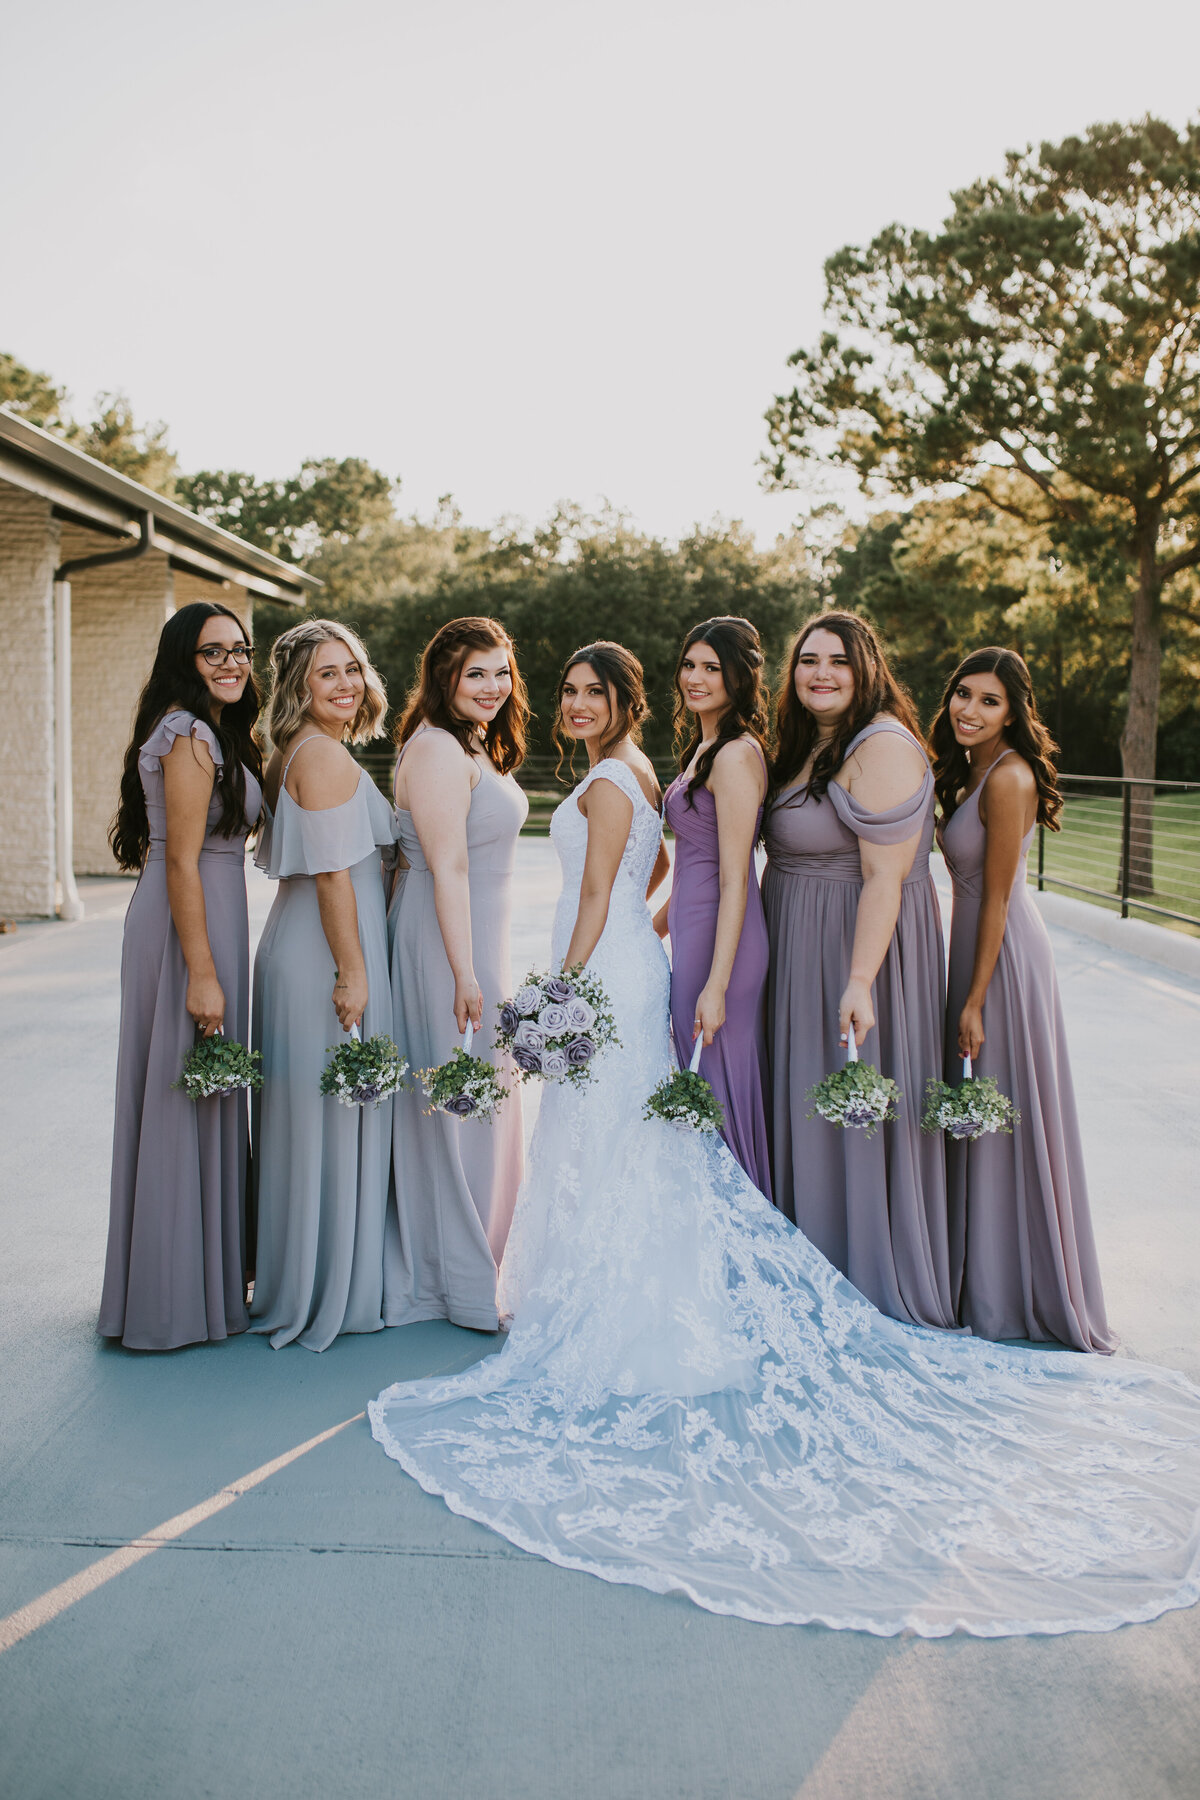 bridal party photos during wedding day in houston